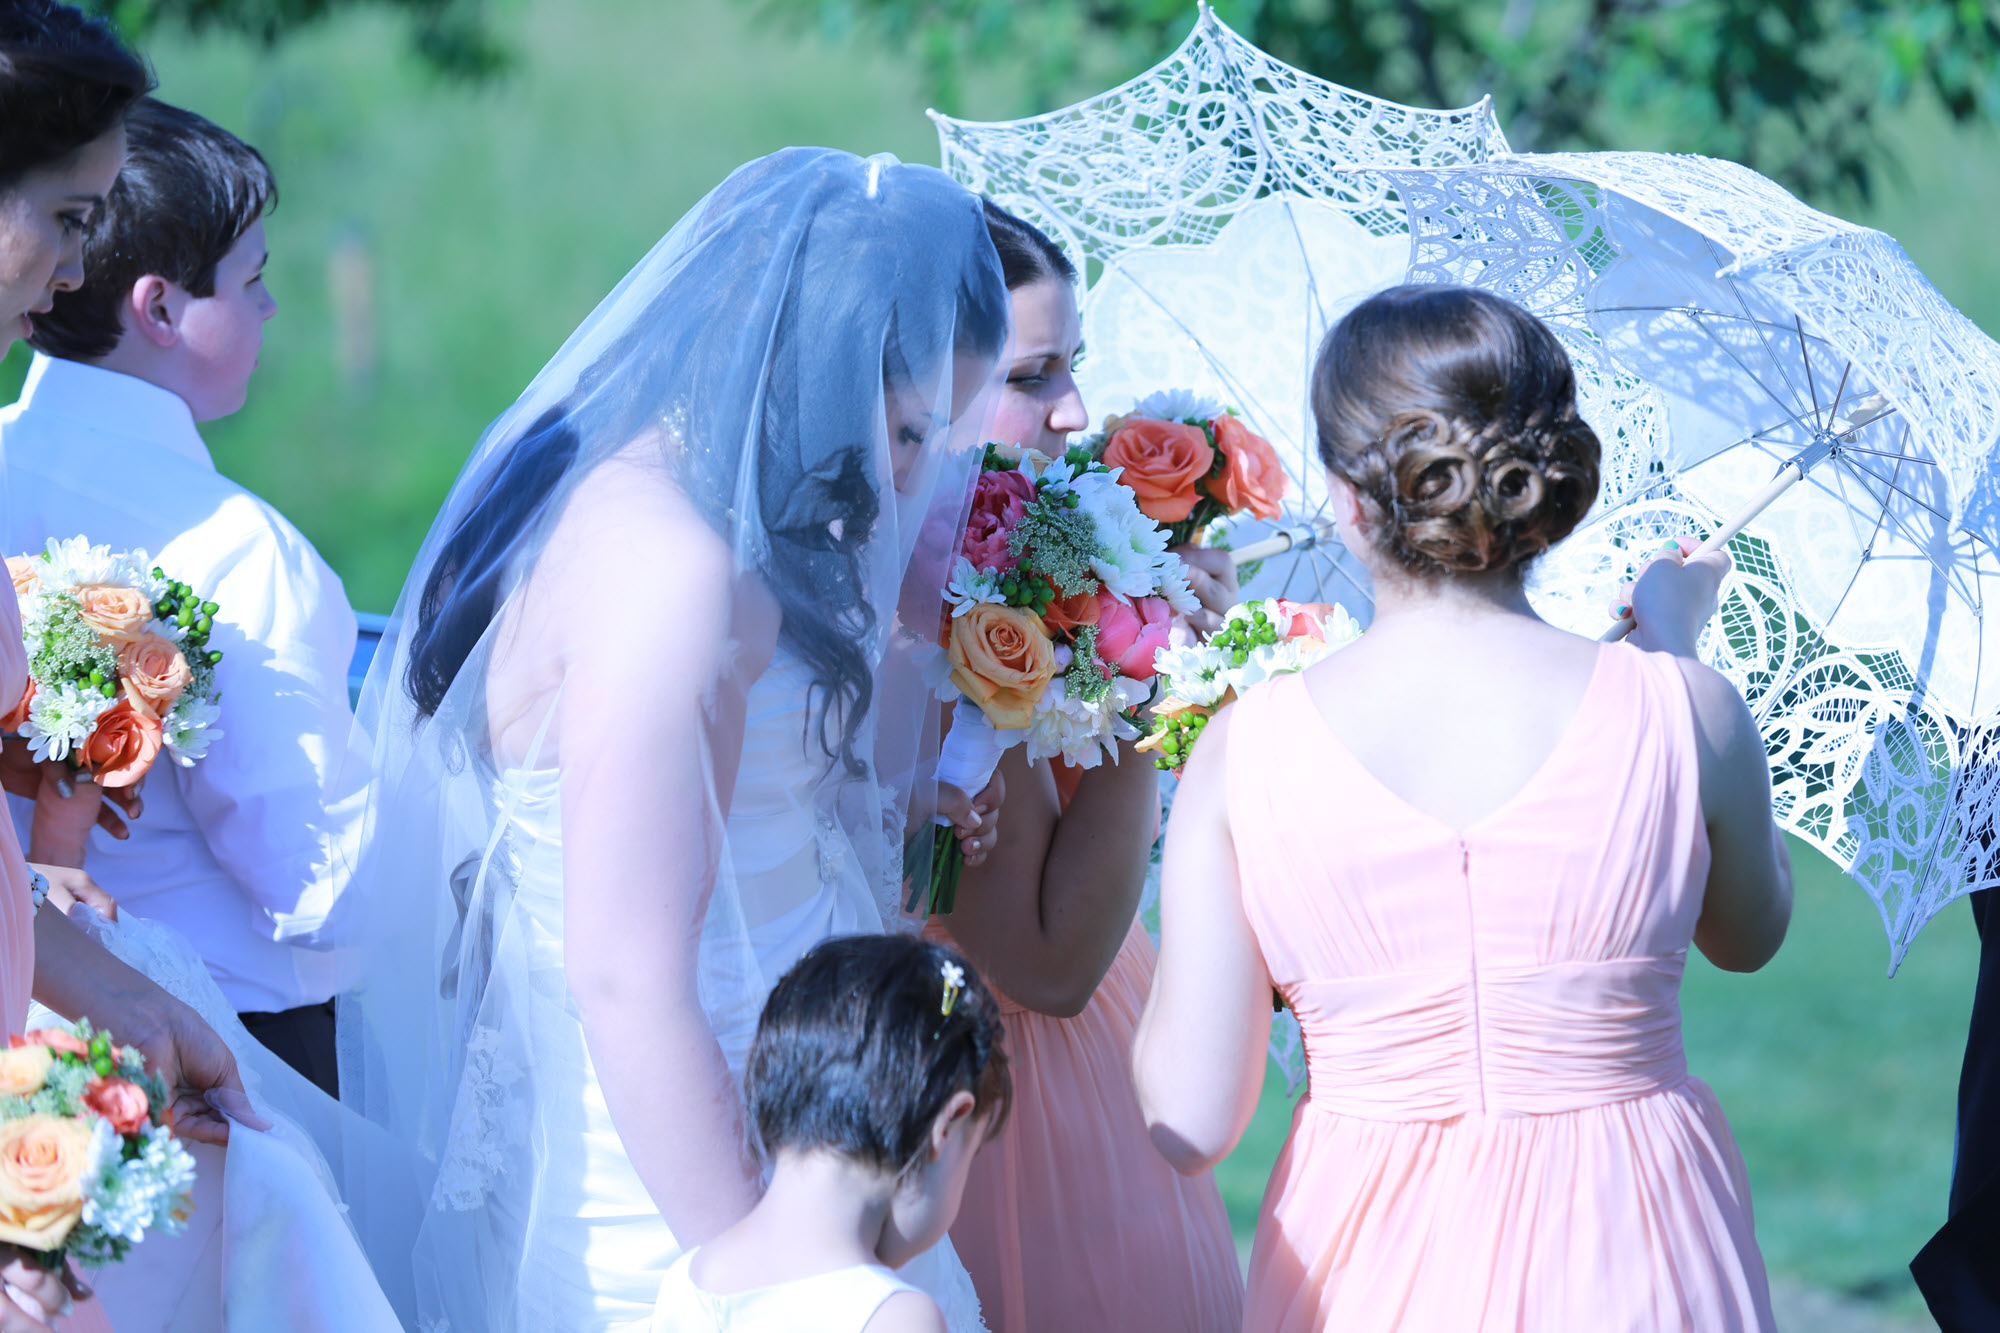 Bridesmaids holding colorful bouquets, shaded by a stylish umbrella under the summer sun at a wedding celebration.